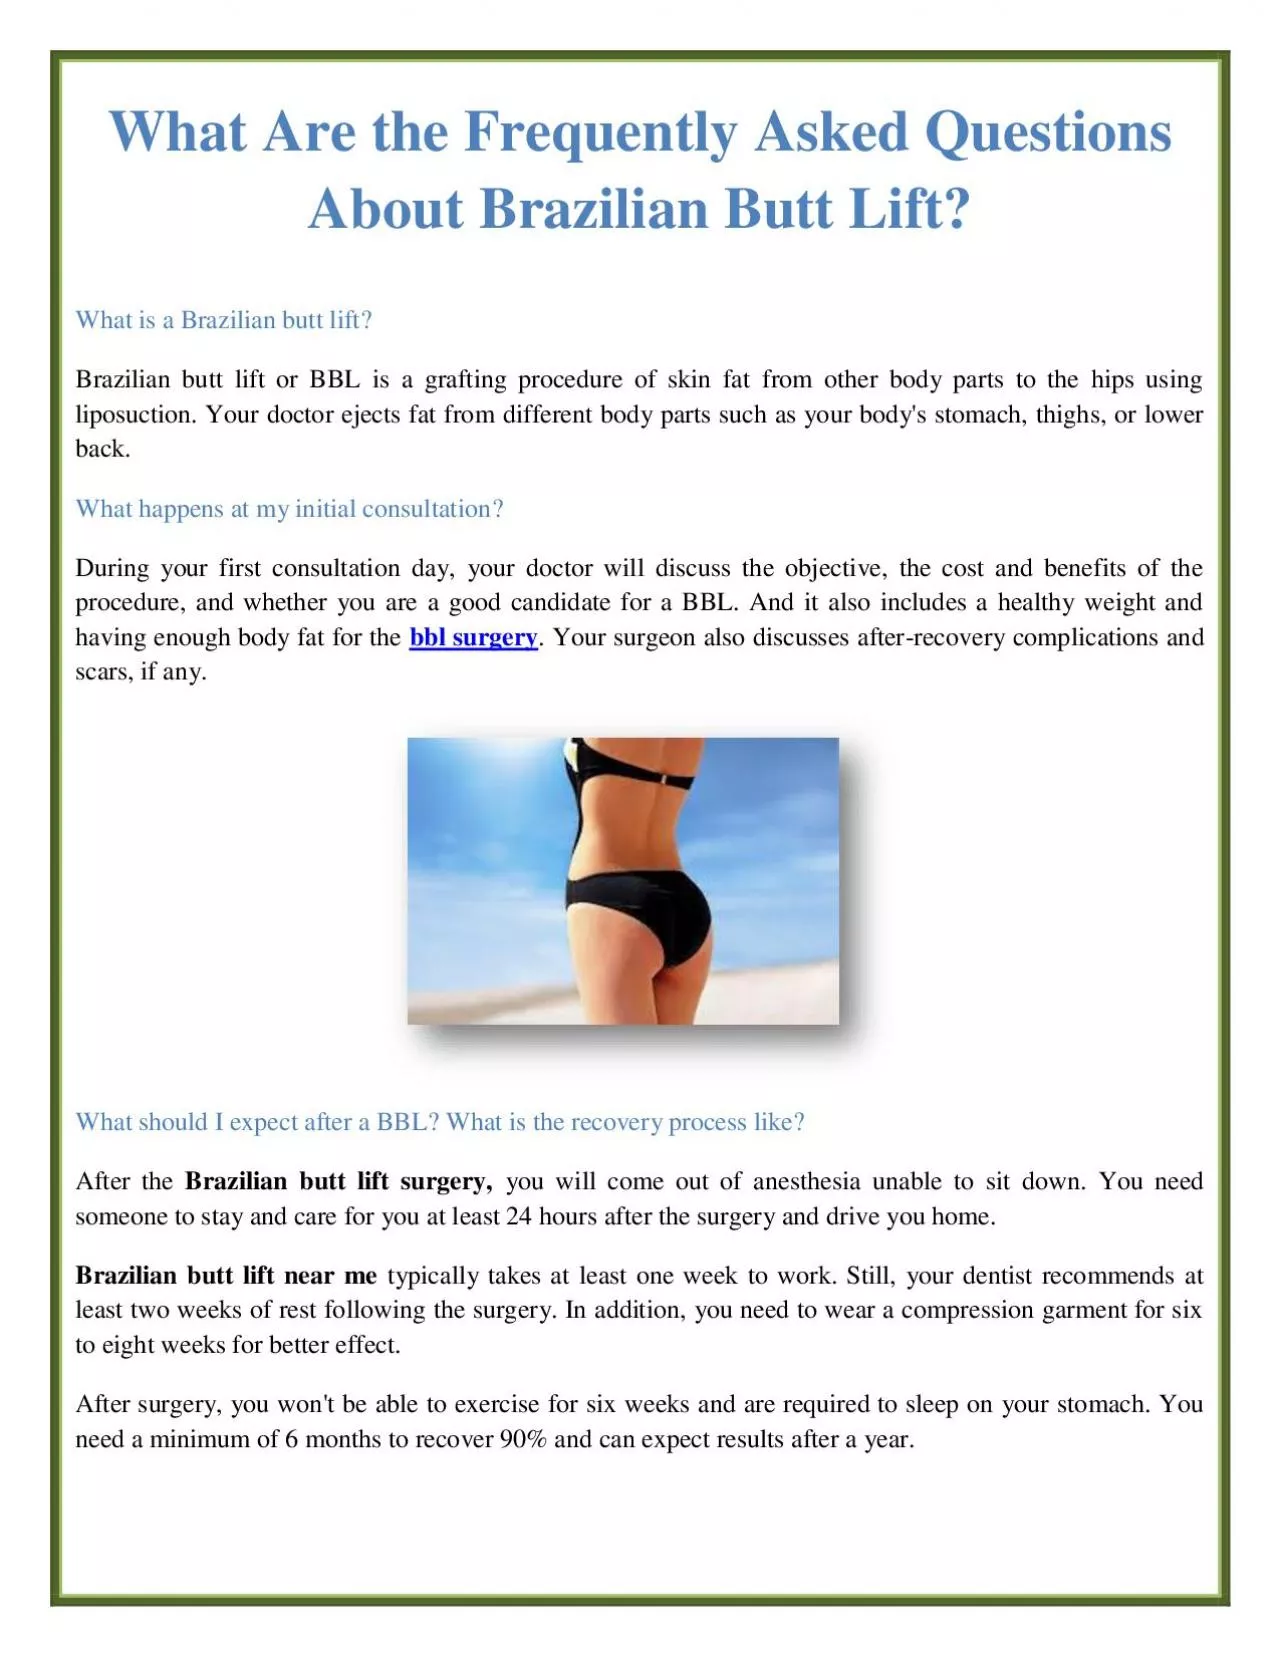 What Are the Frequently Asked Questions About Brazilian Butt Lift?